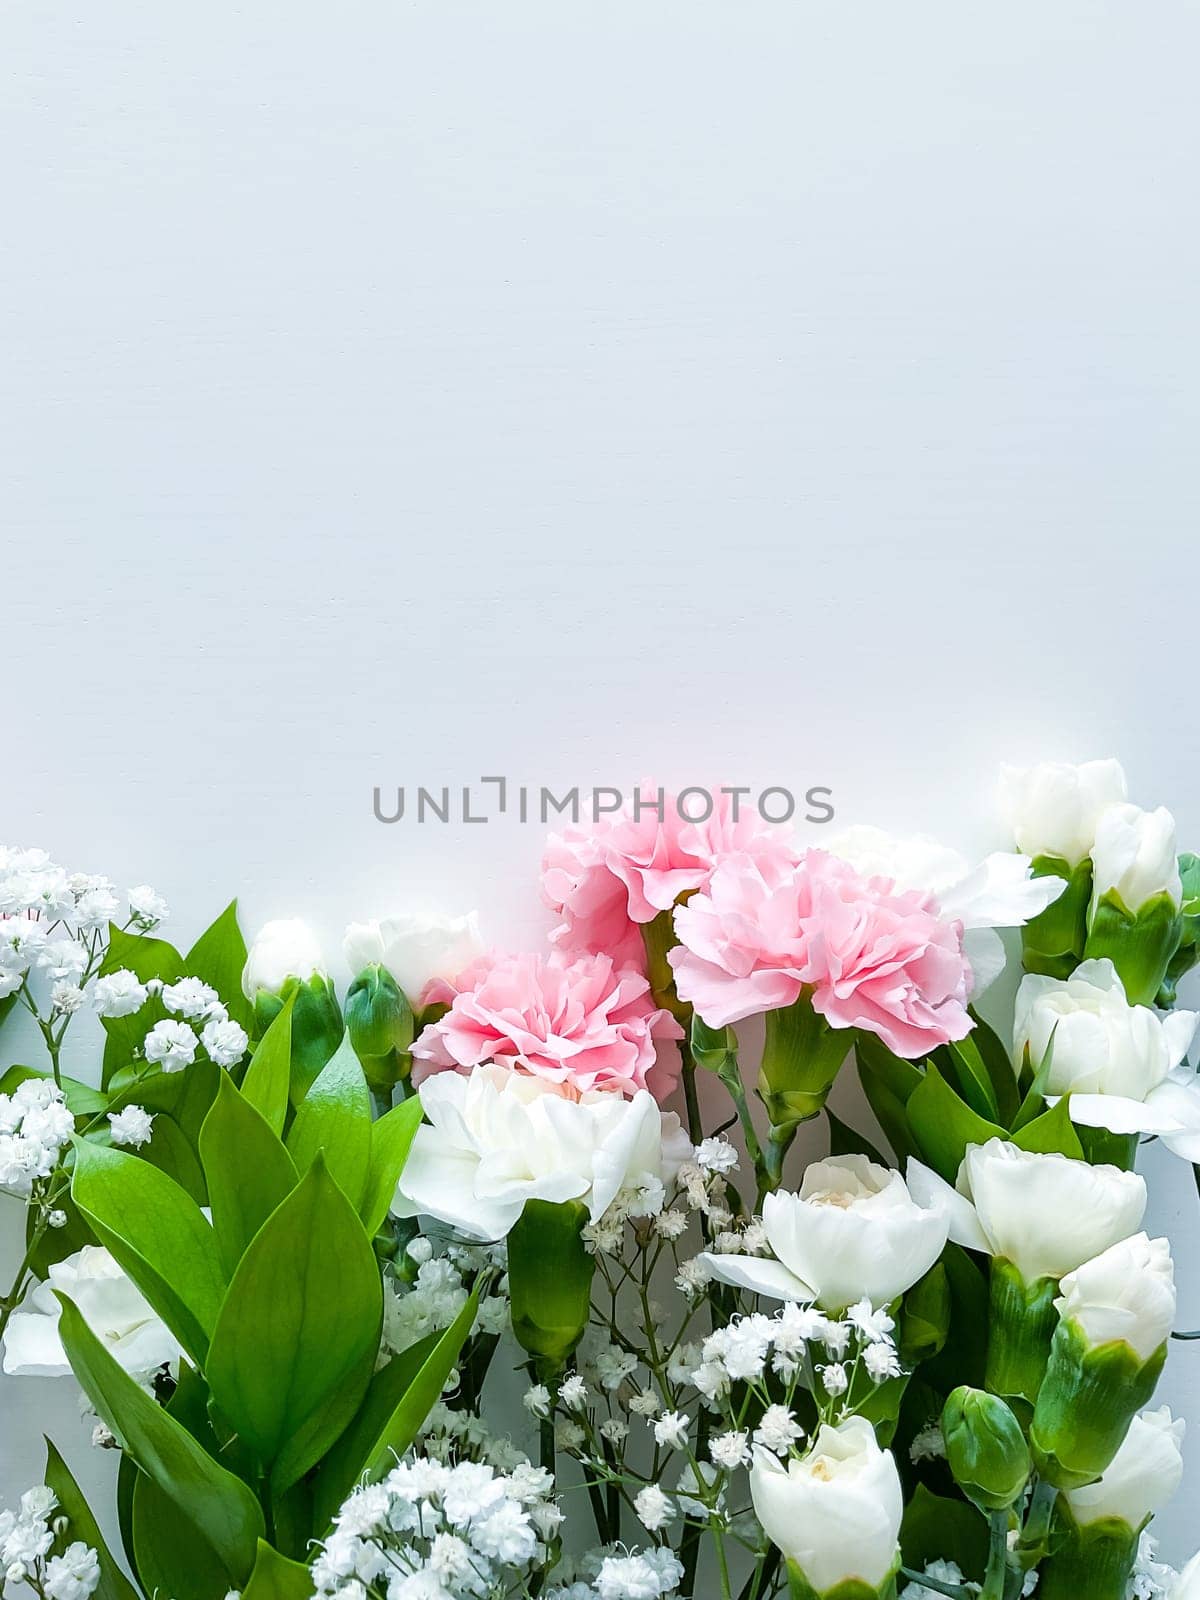 Close up photo of a bouquet of pink and white carnations isolated on a white background. With empty space for text or inscription. For postcard, advertisement or website.